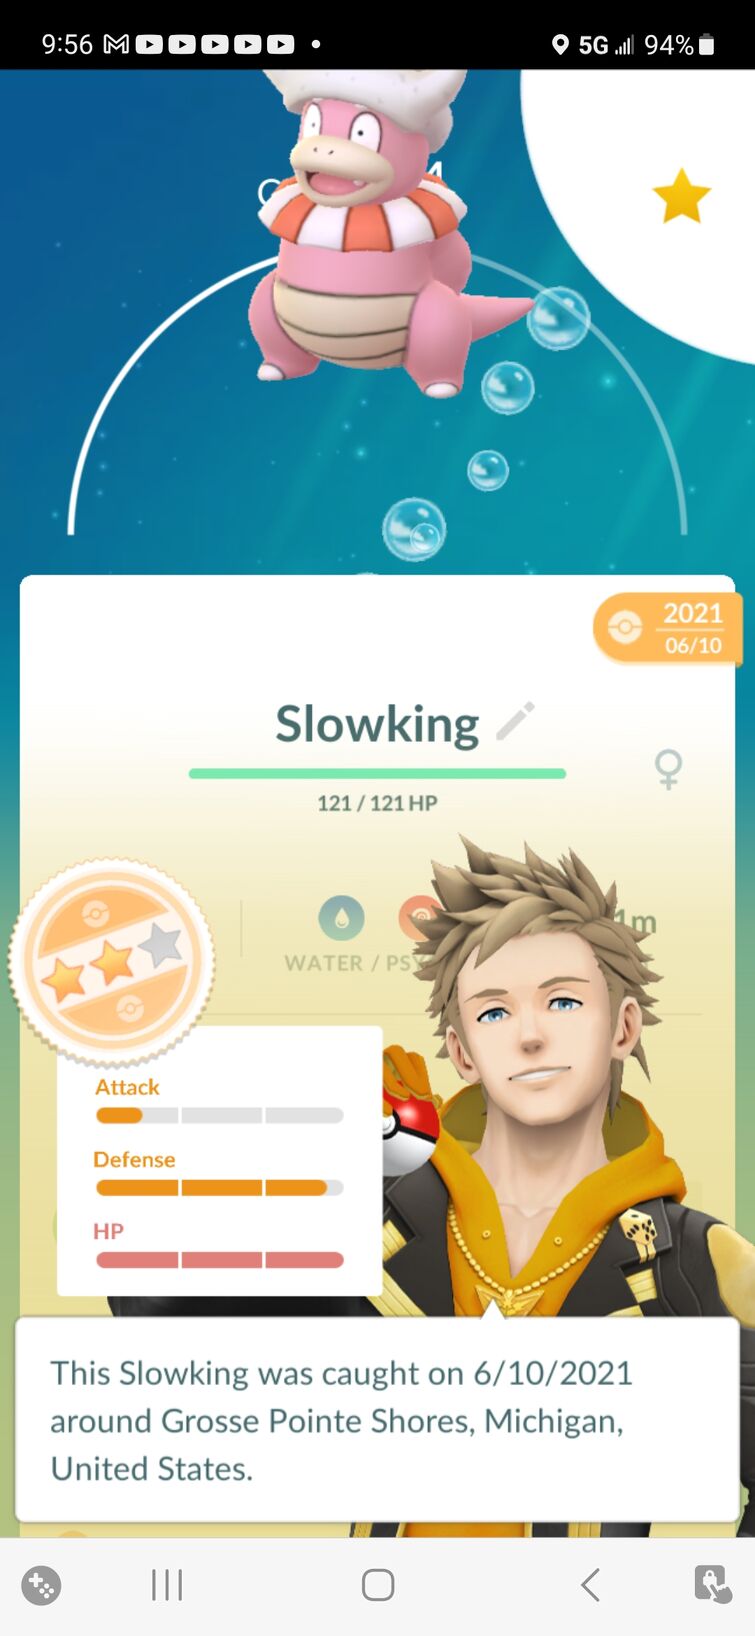 Finally got enough mega energy to mega evolve my fav shiny of all time -  and right before Halloween 👻 : r/pokemongo